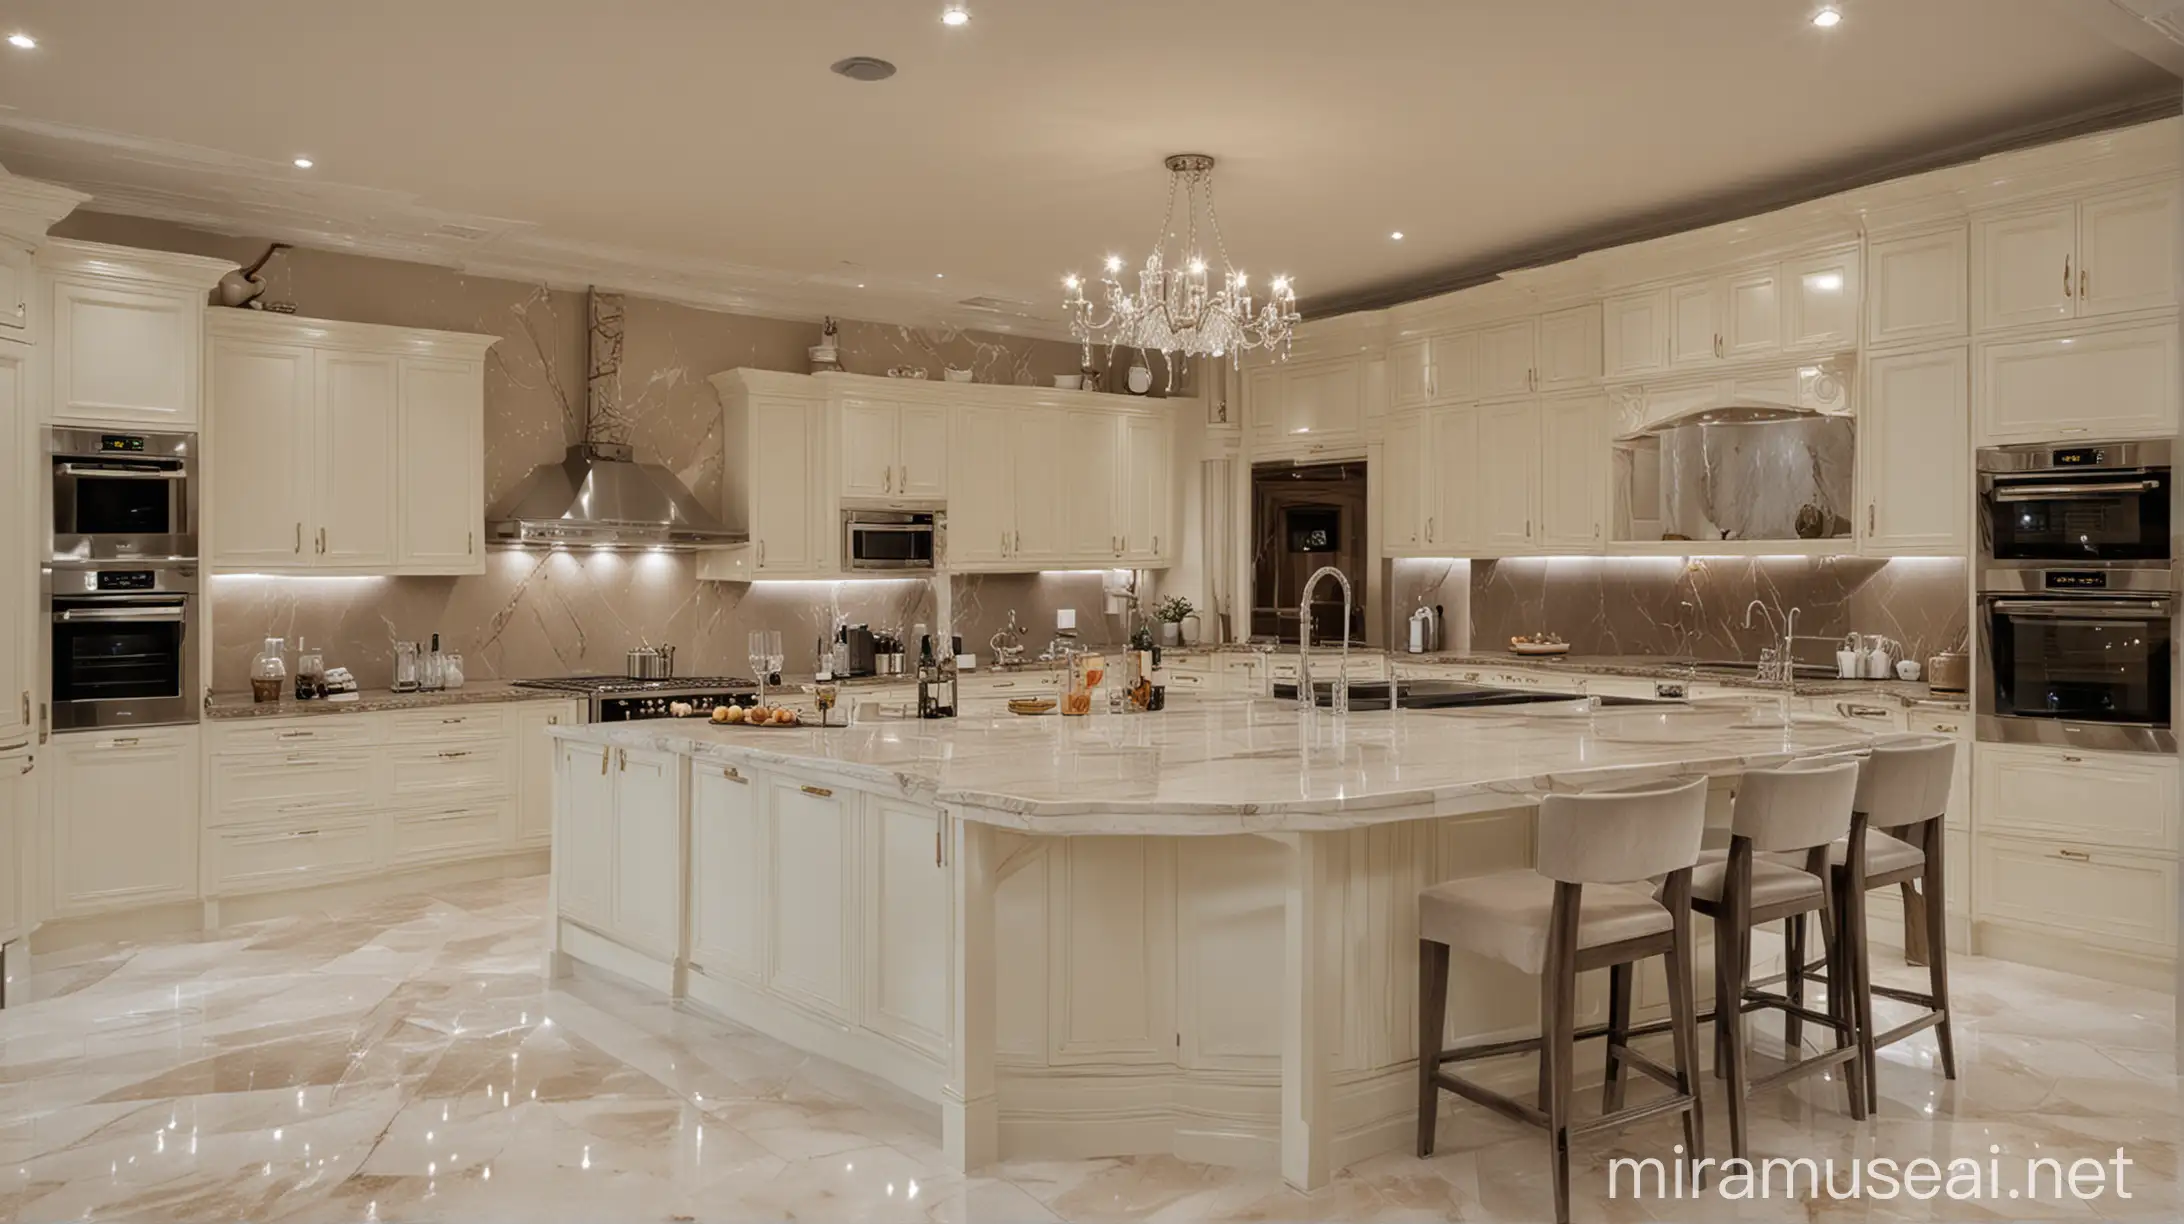 Elegant Luxury Kitchen with Modern Appliances and Chic Dcor